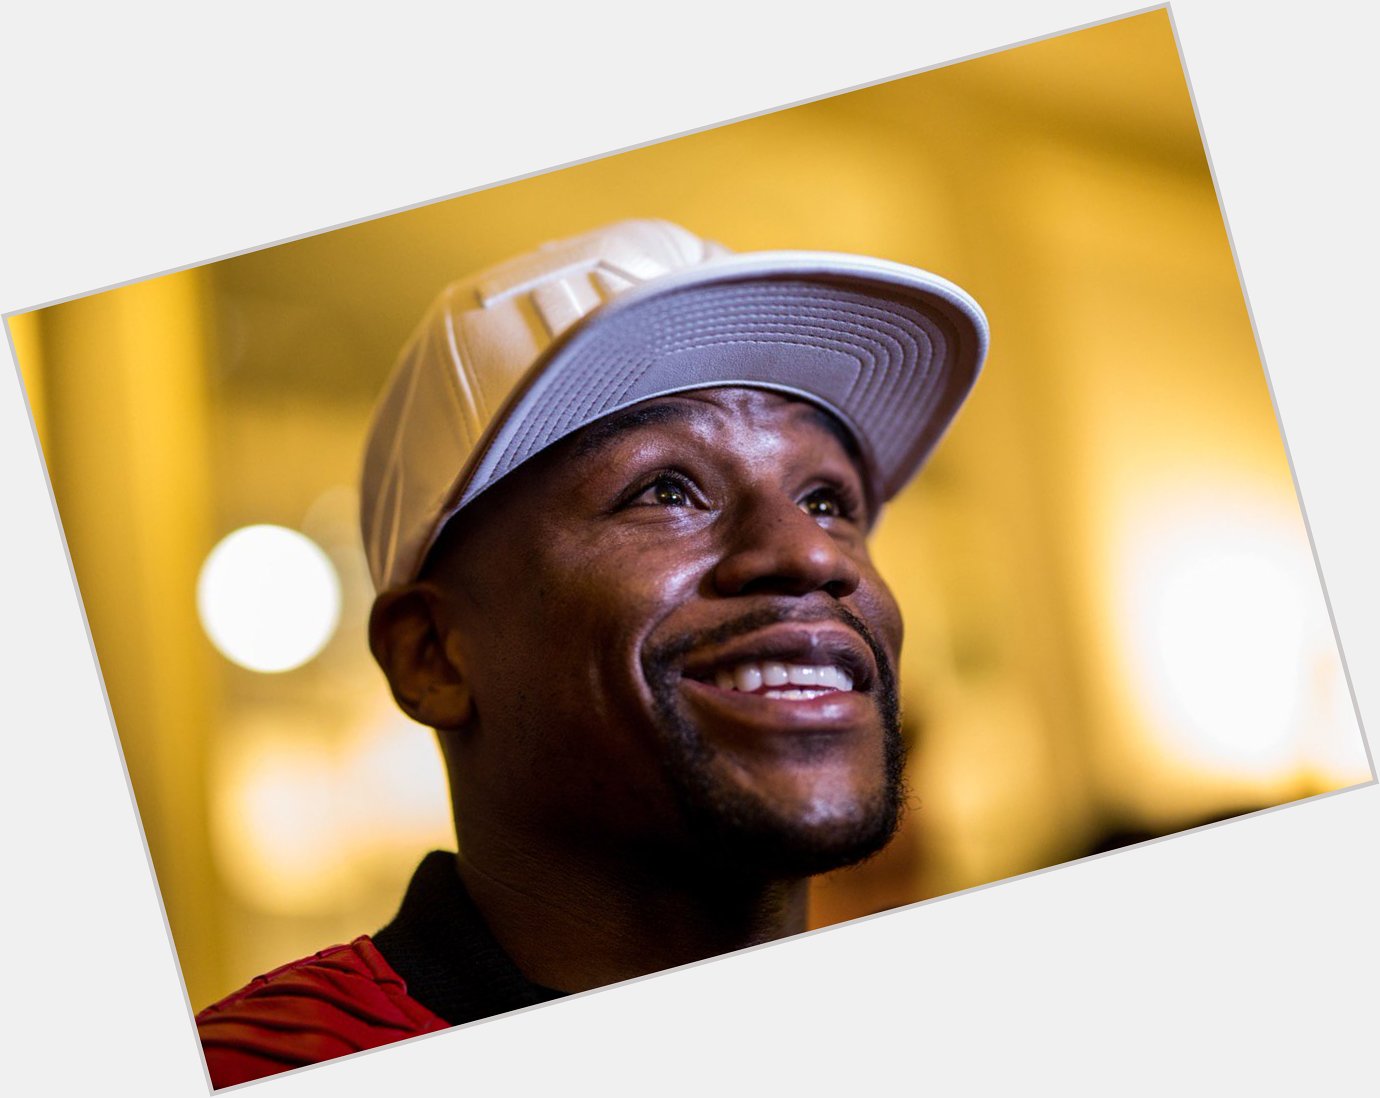 50 fights 50 wins Say no more Happy birthday to a superstar of boxing, Floyd Mayweather Jr. 